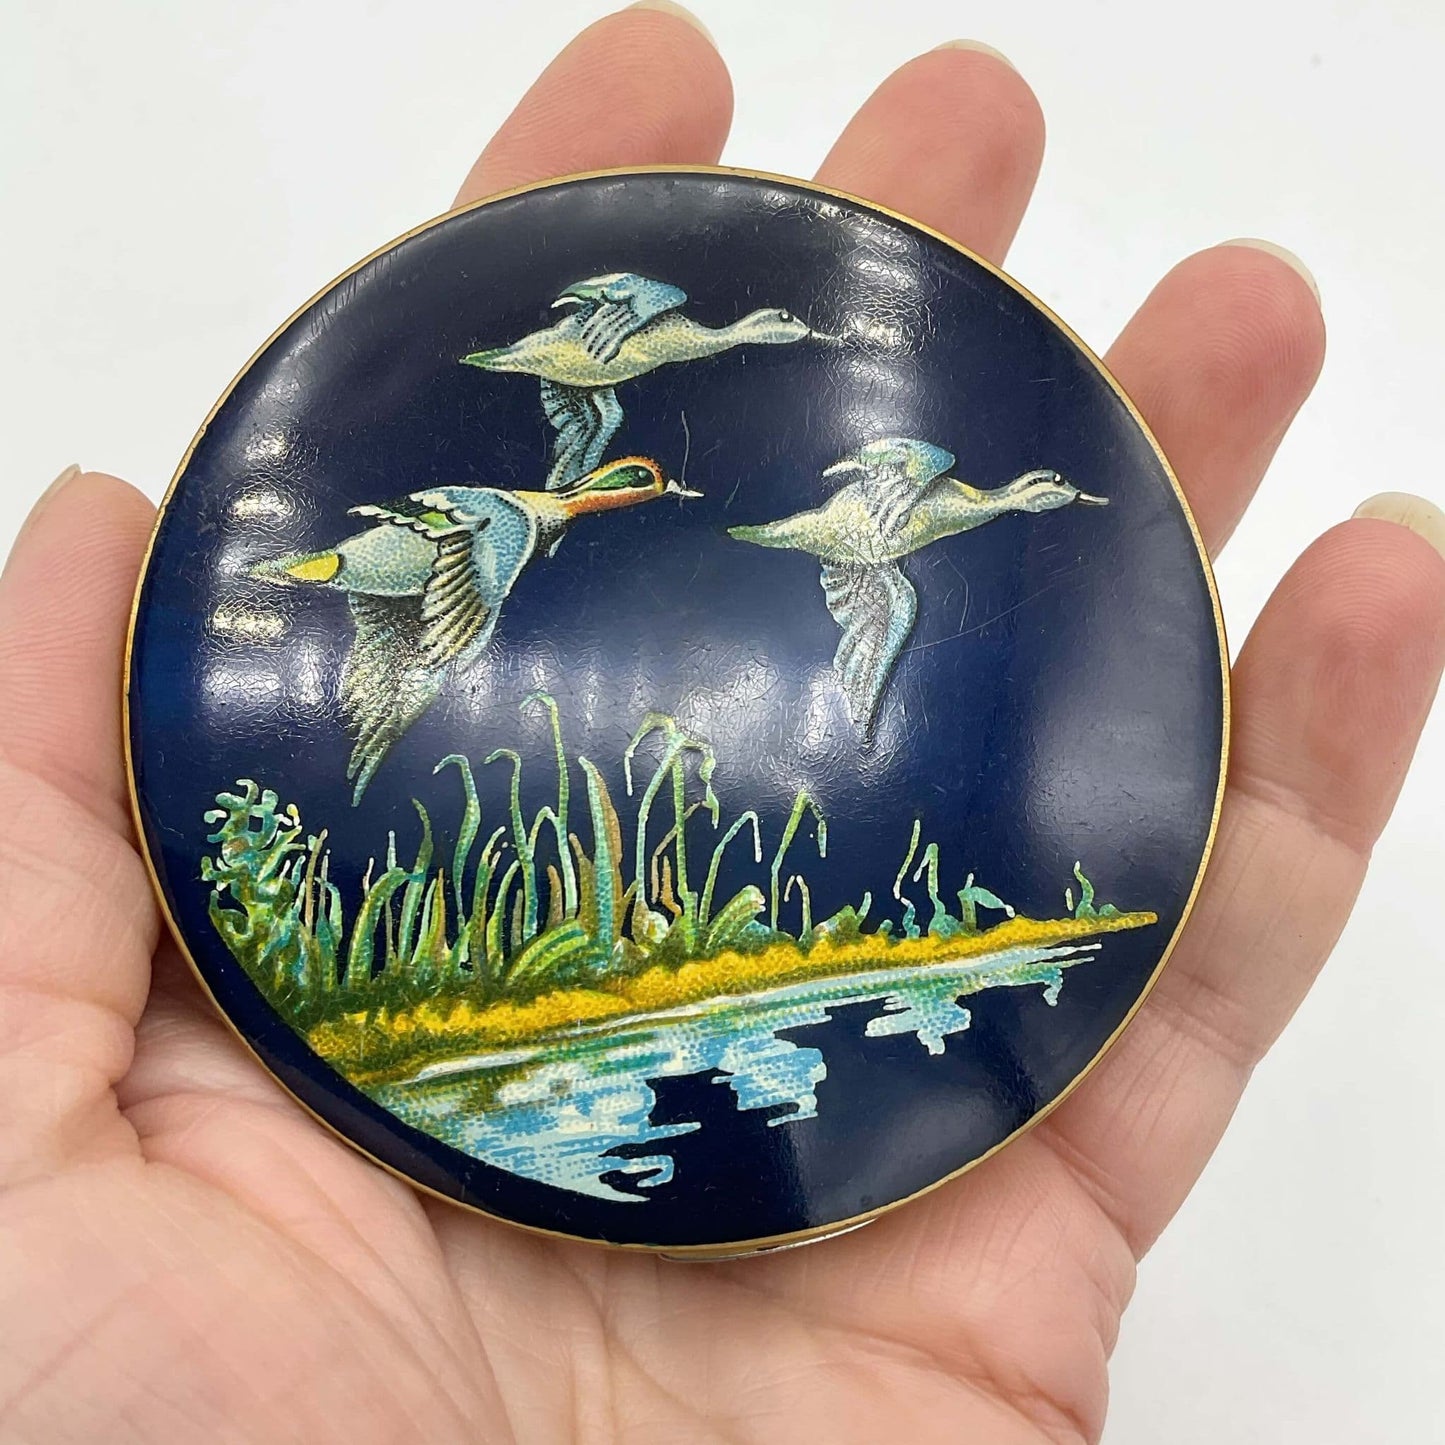 beautiful enamel featuring three ducks flying over water on a mirror compact lid held in a hand